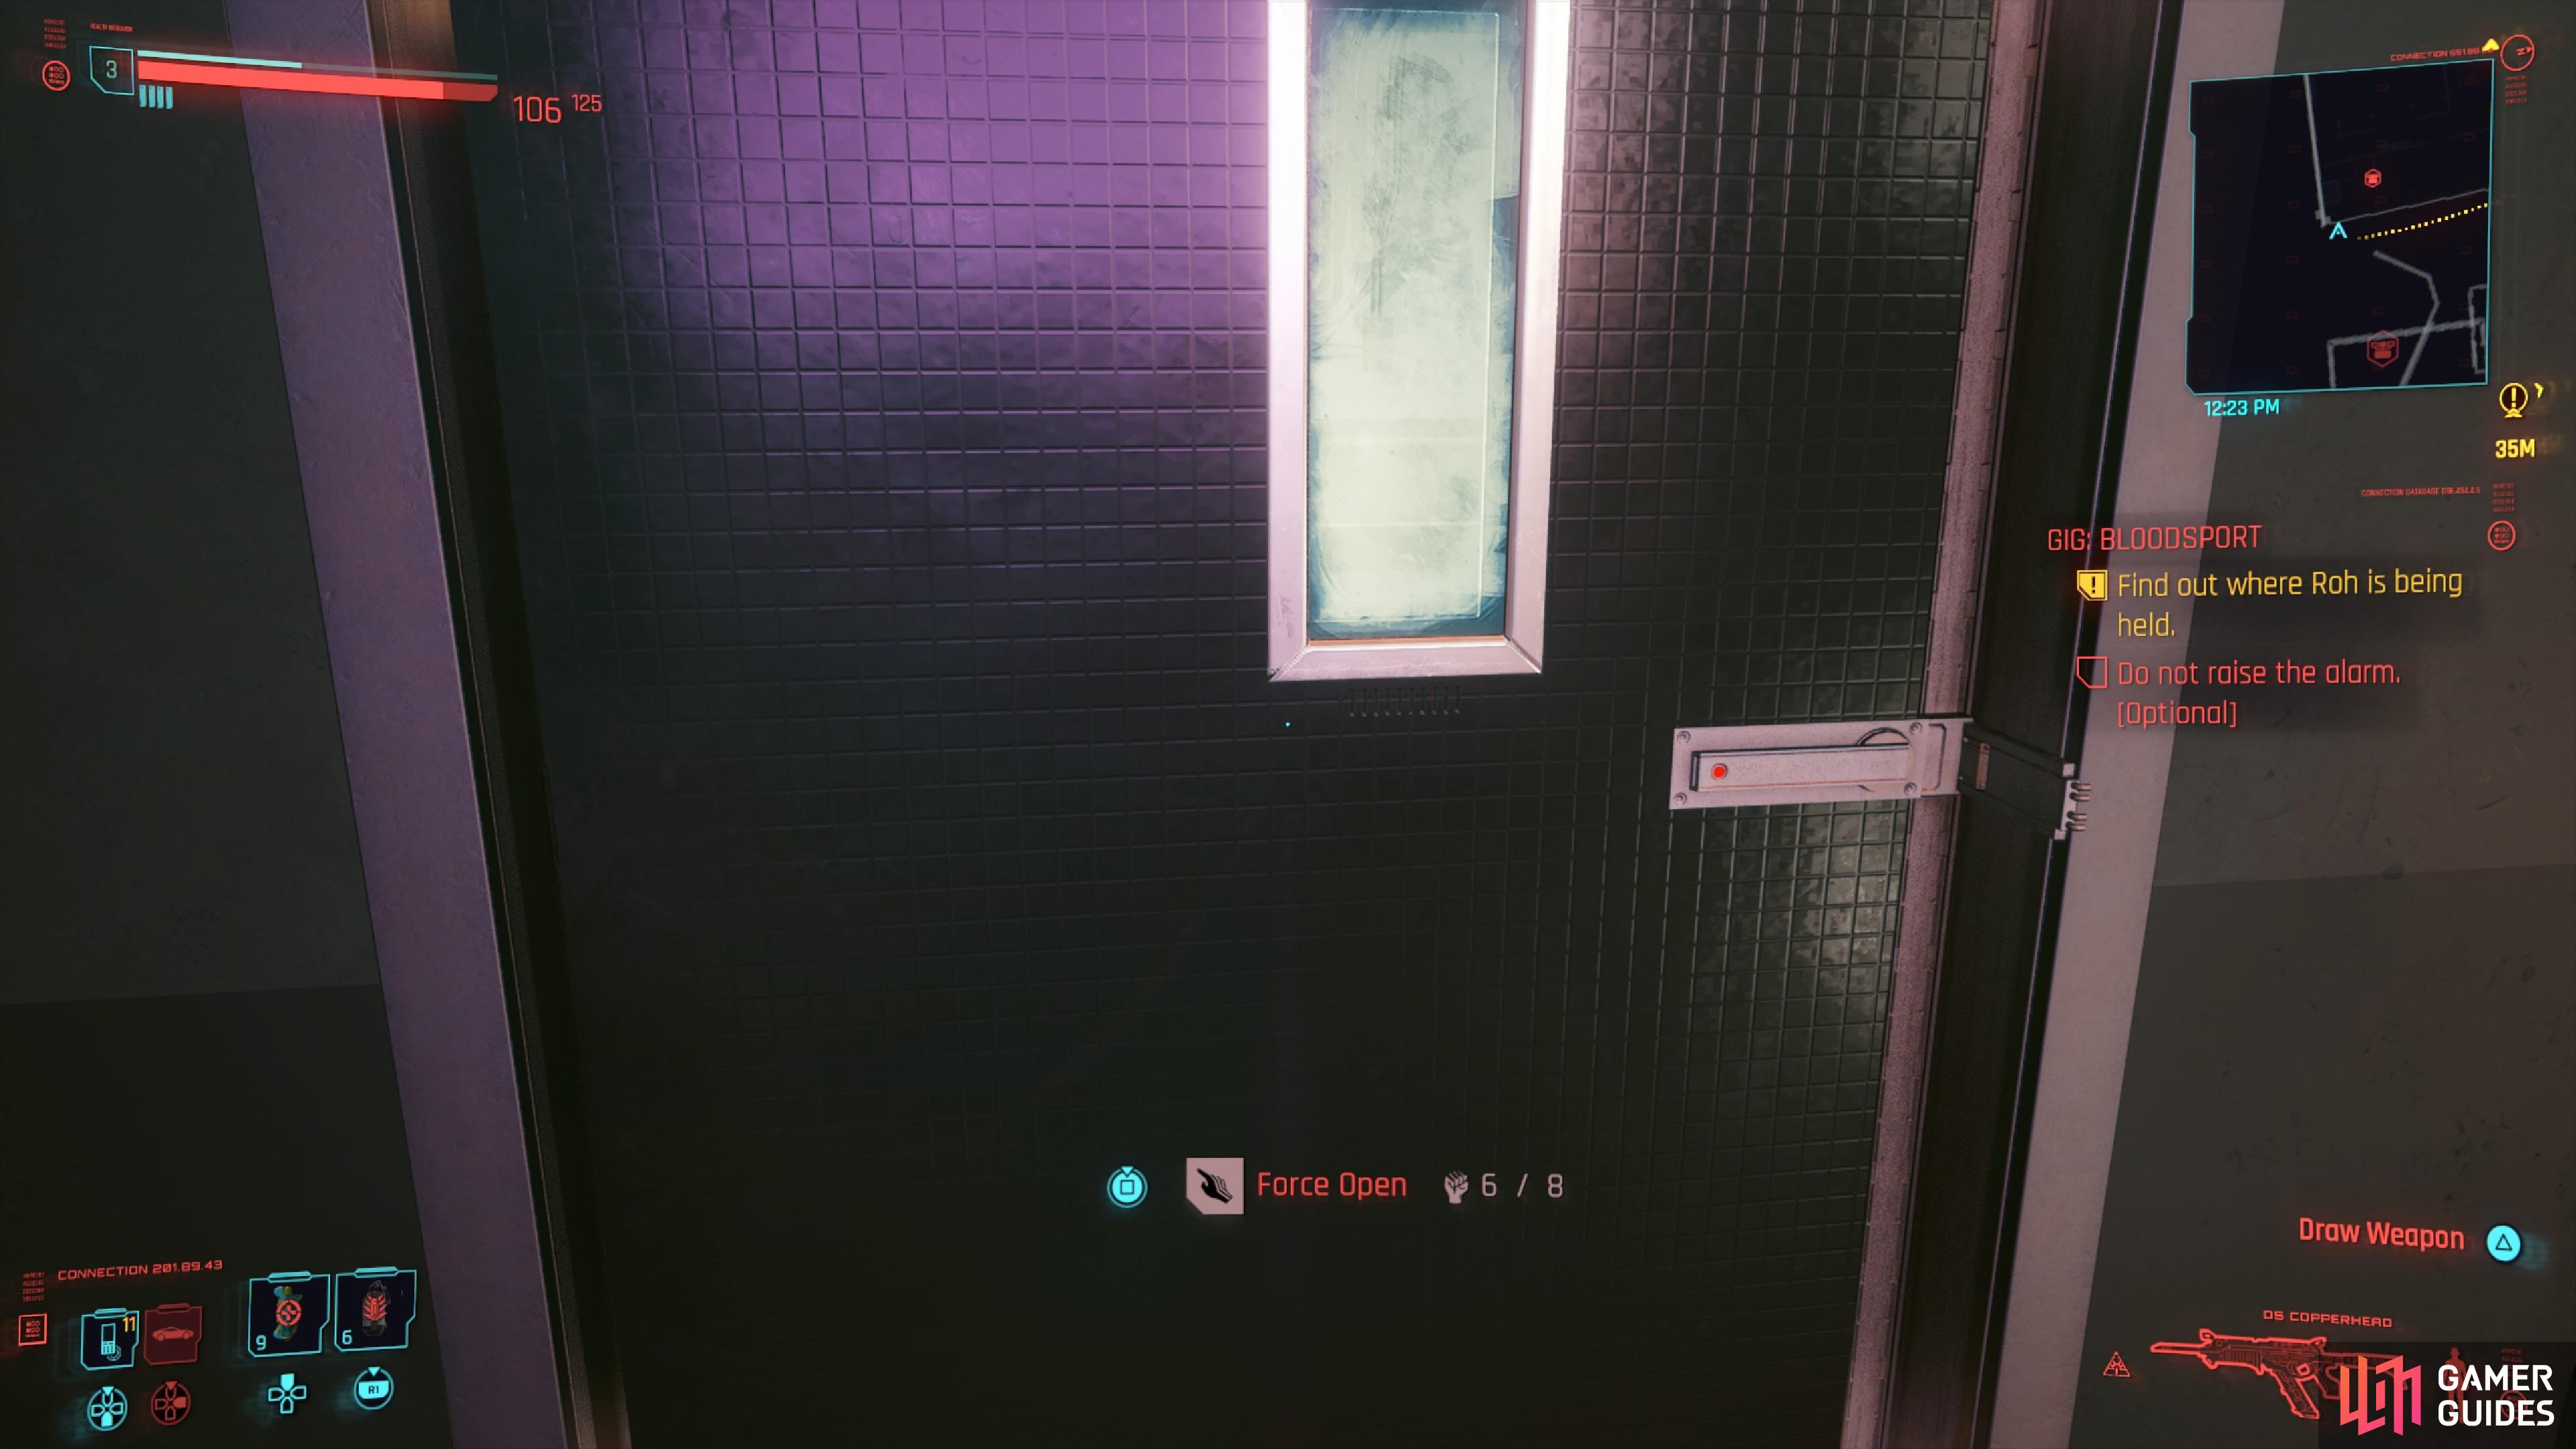 You can open the door to the left of the building if your Body Stat is Level 8.